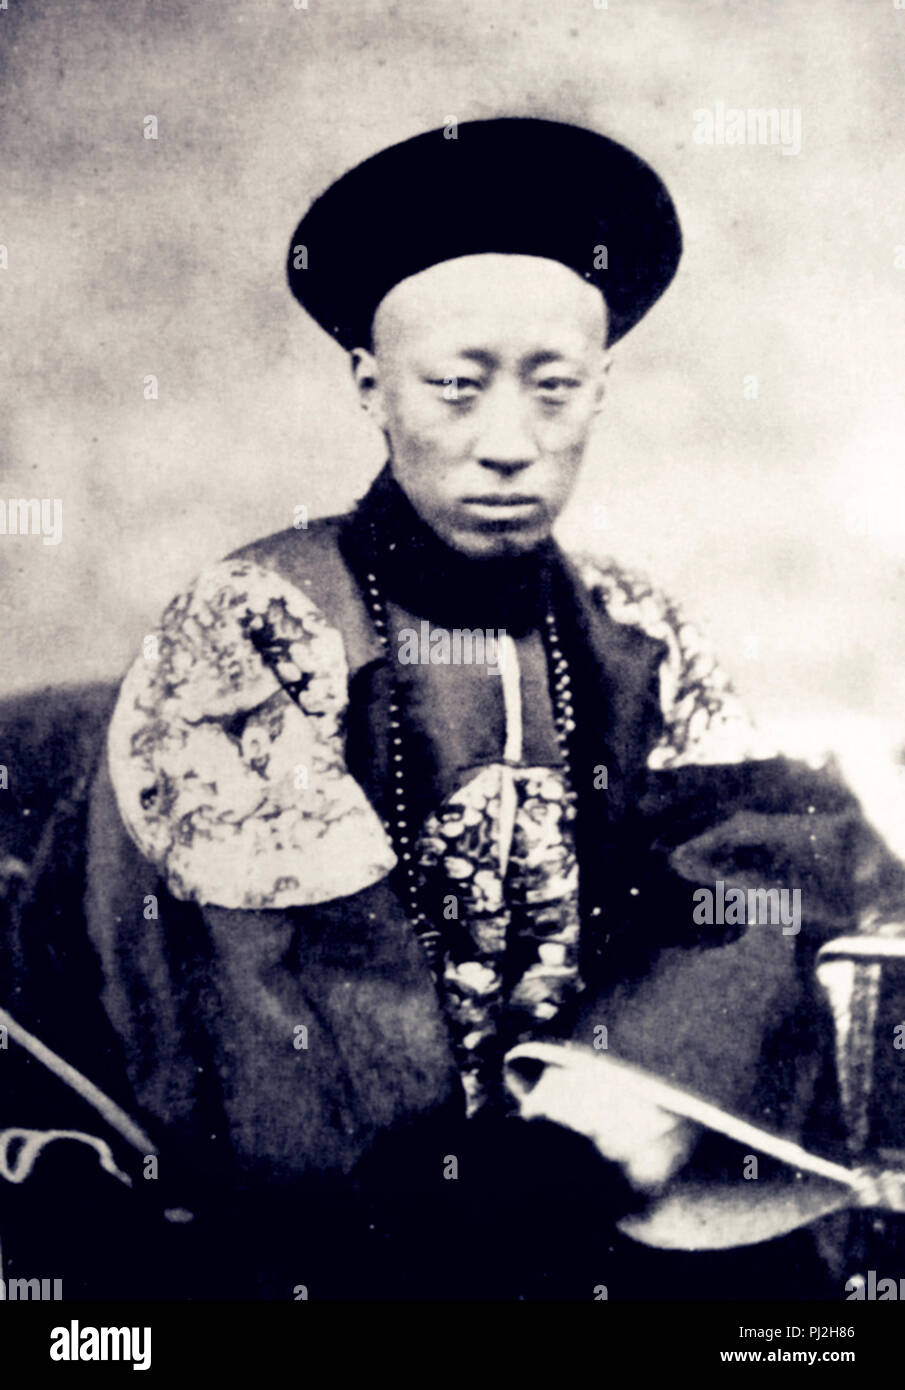 https://c8.alamy.com/comp/PJ2H86/prince-gong-cixis-crucial-ally-during-the-xinyou-coup-he-was-rewarded-by-cixi-for-his-help-during-her-most-difficult-times-but-was-eventually-eliminated-from-office-by-cixi-for-his-ambition-PJ2H86.jpg